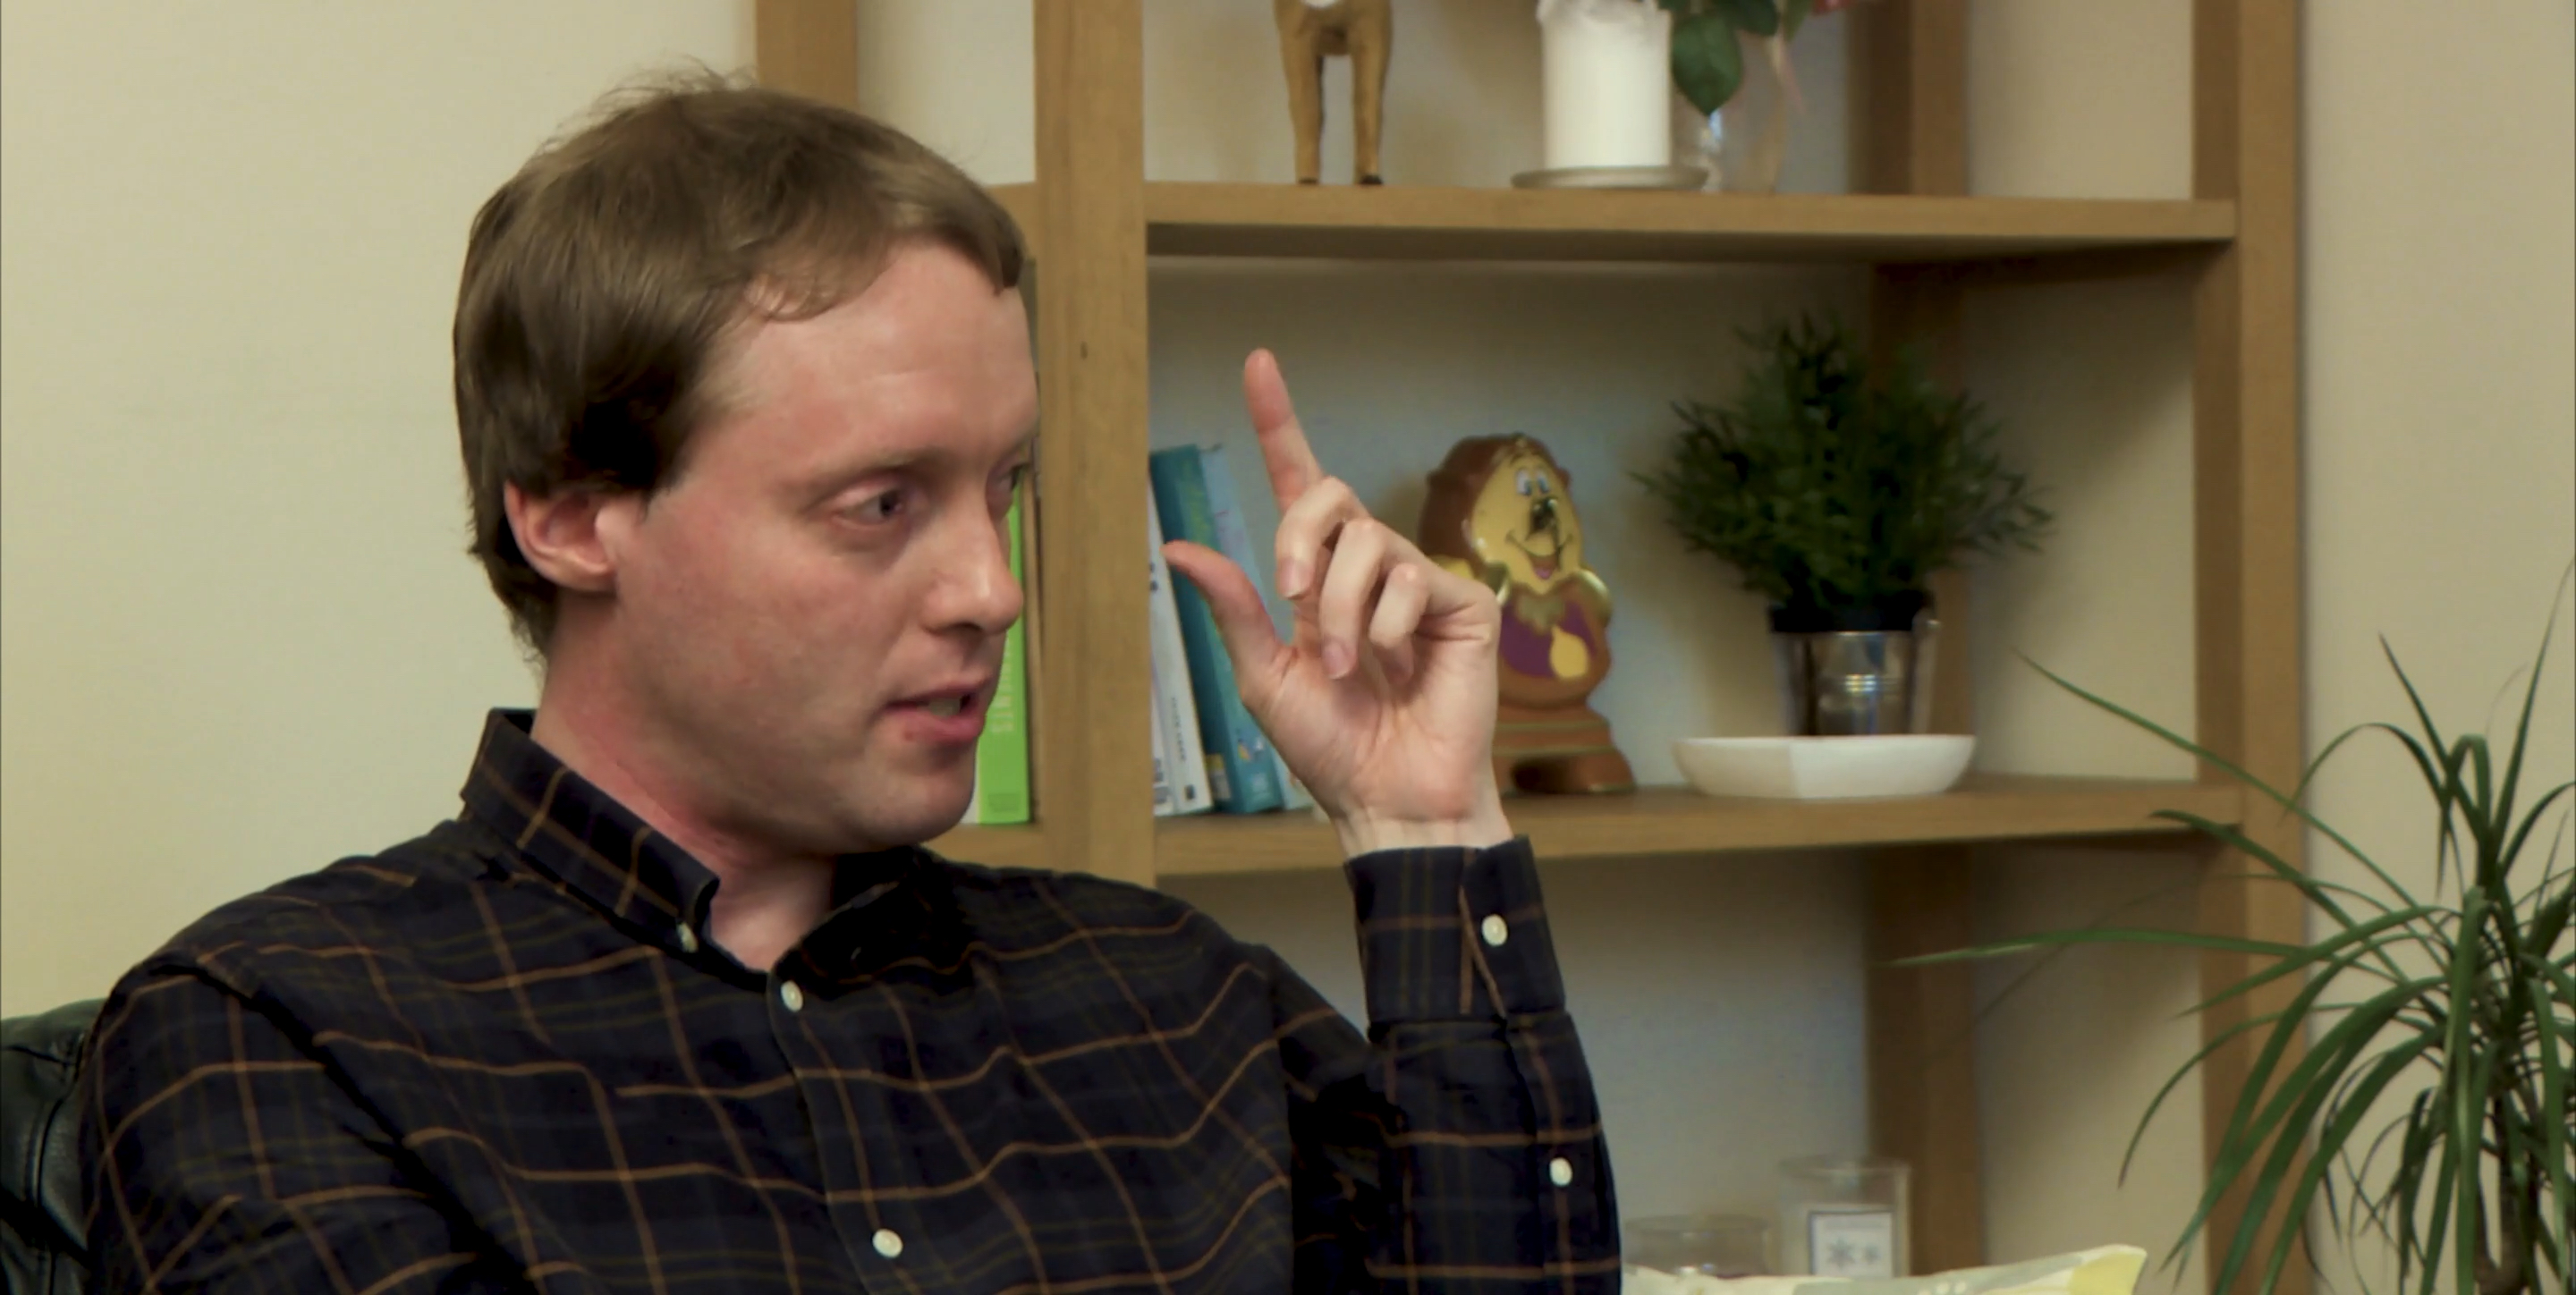 Close-up of Glen gesturing with his fingers near his eye, during his interview in a living room.